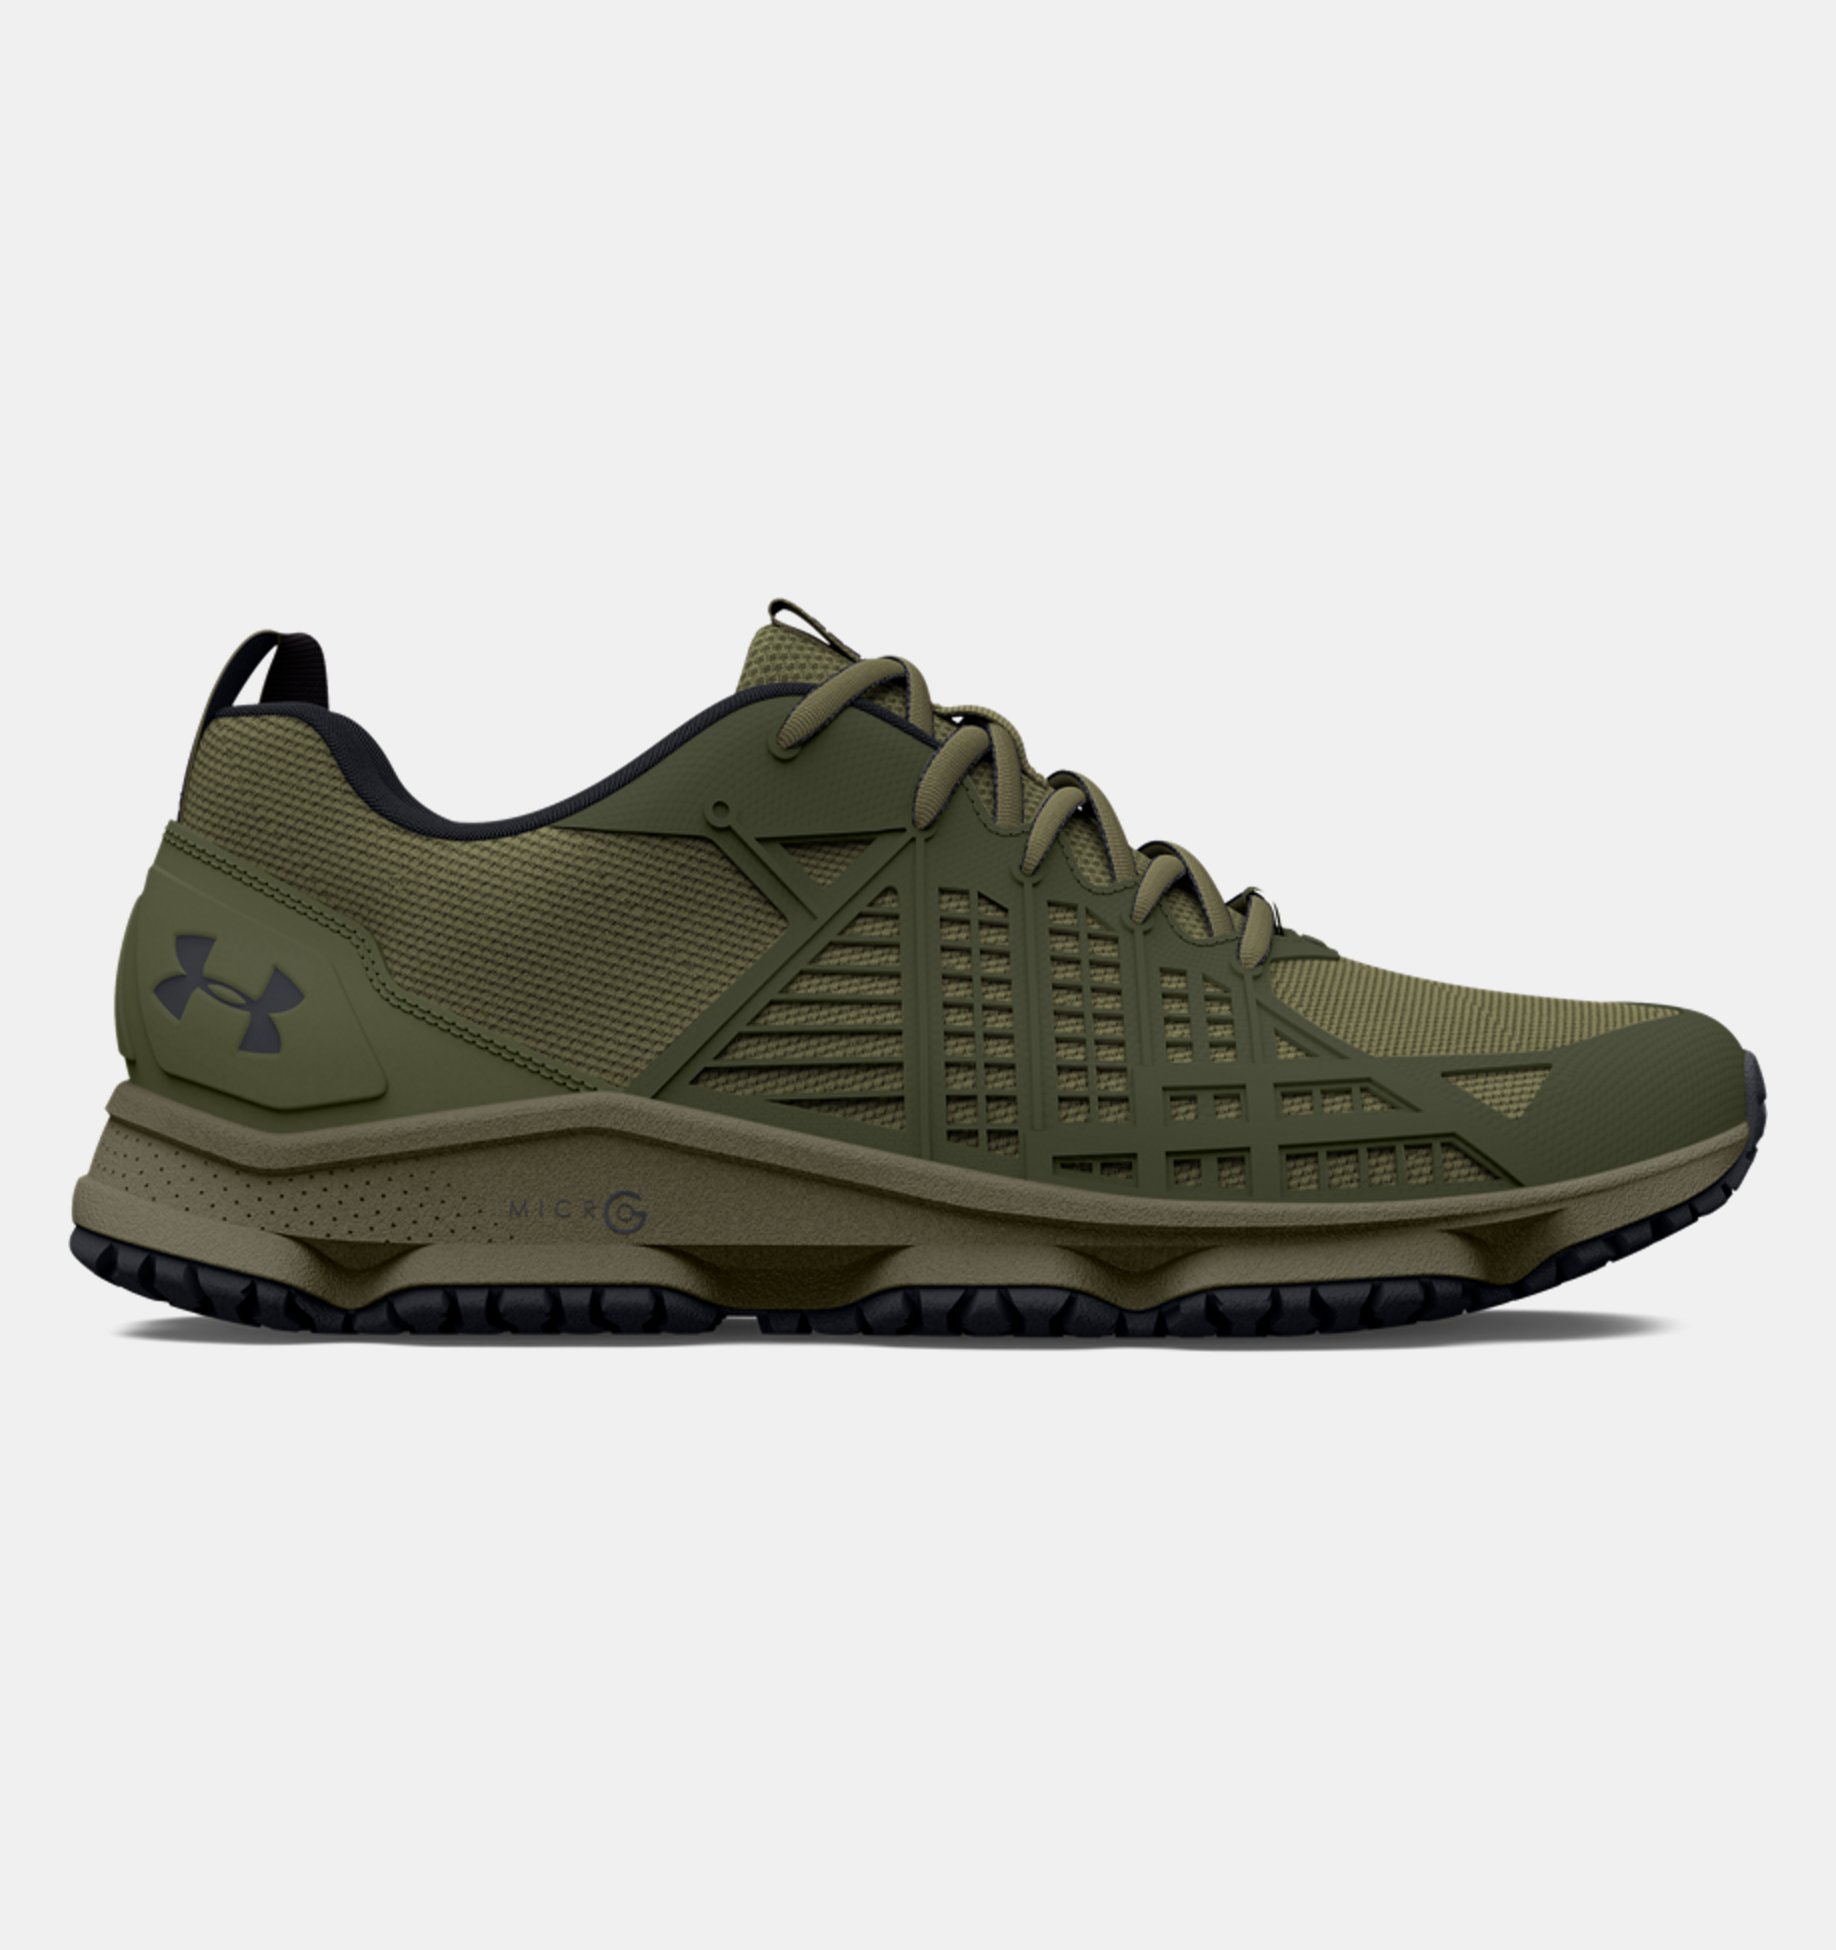 Under Armour Men's UA Micro G Strikefast Tactical Athletic Shoes (Green/Gray) $48 + Free Shipping